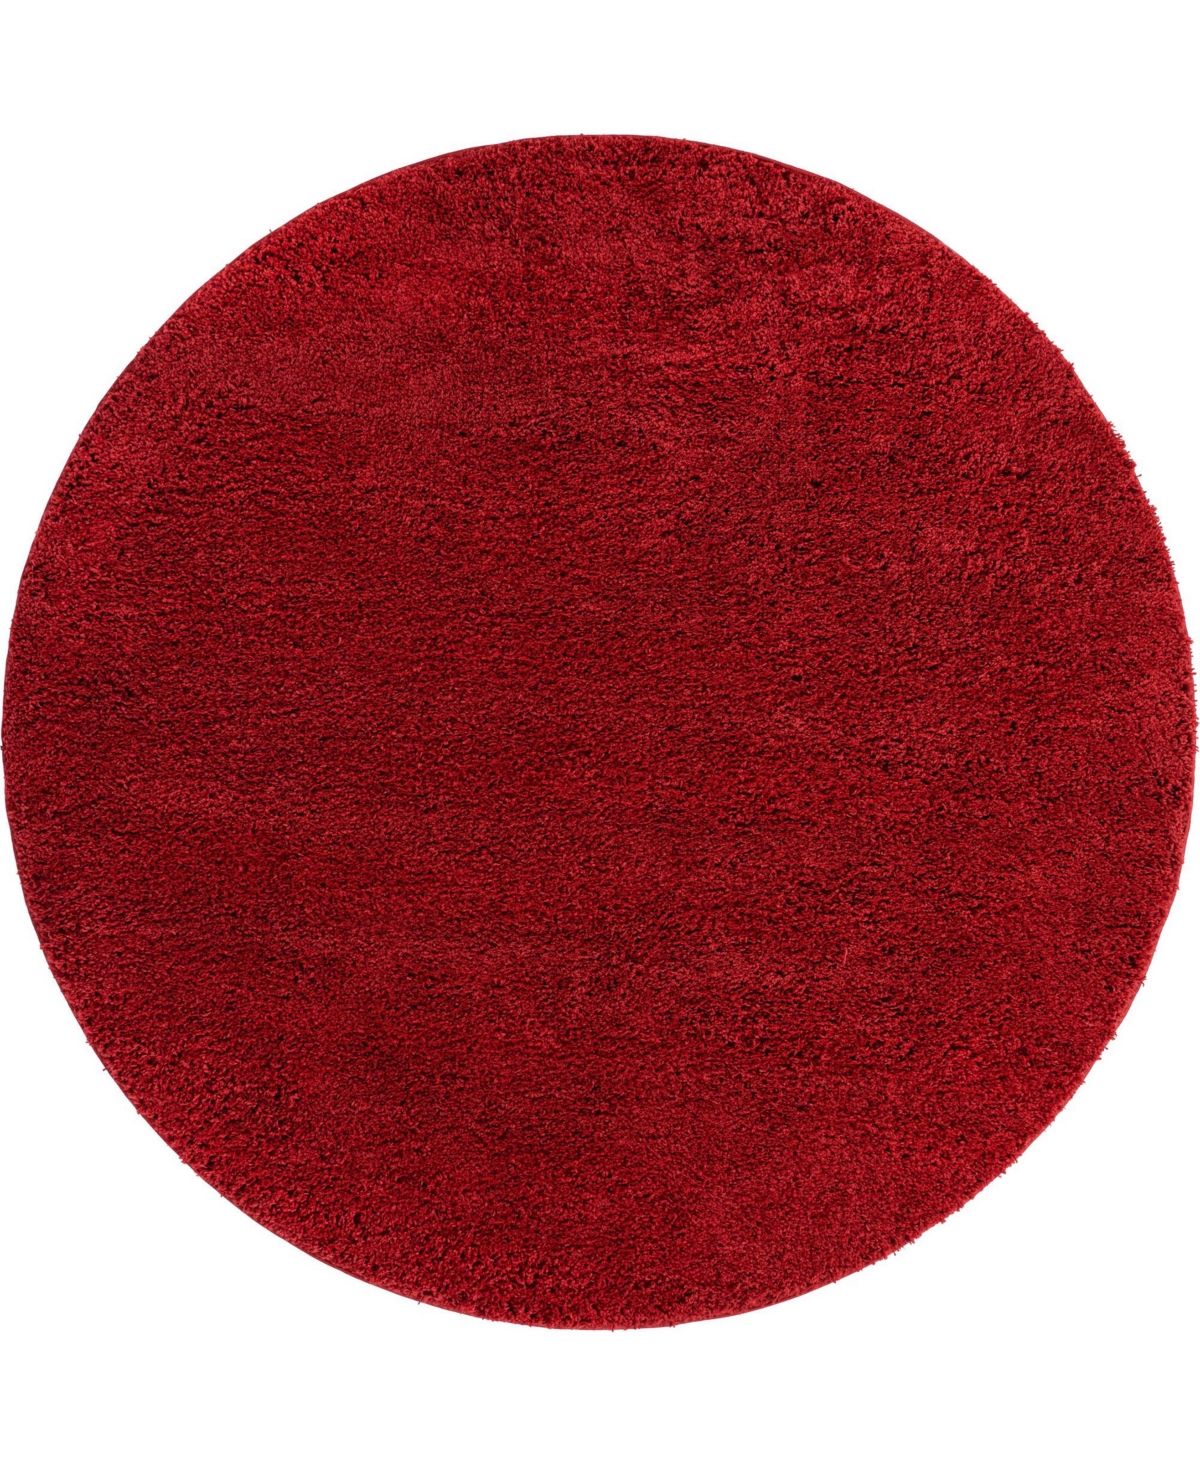 Bayshore Home Always Shag Solid 8'2in x 8'2in Round Area Rug - Cherry